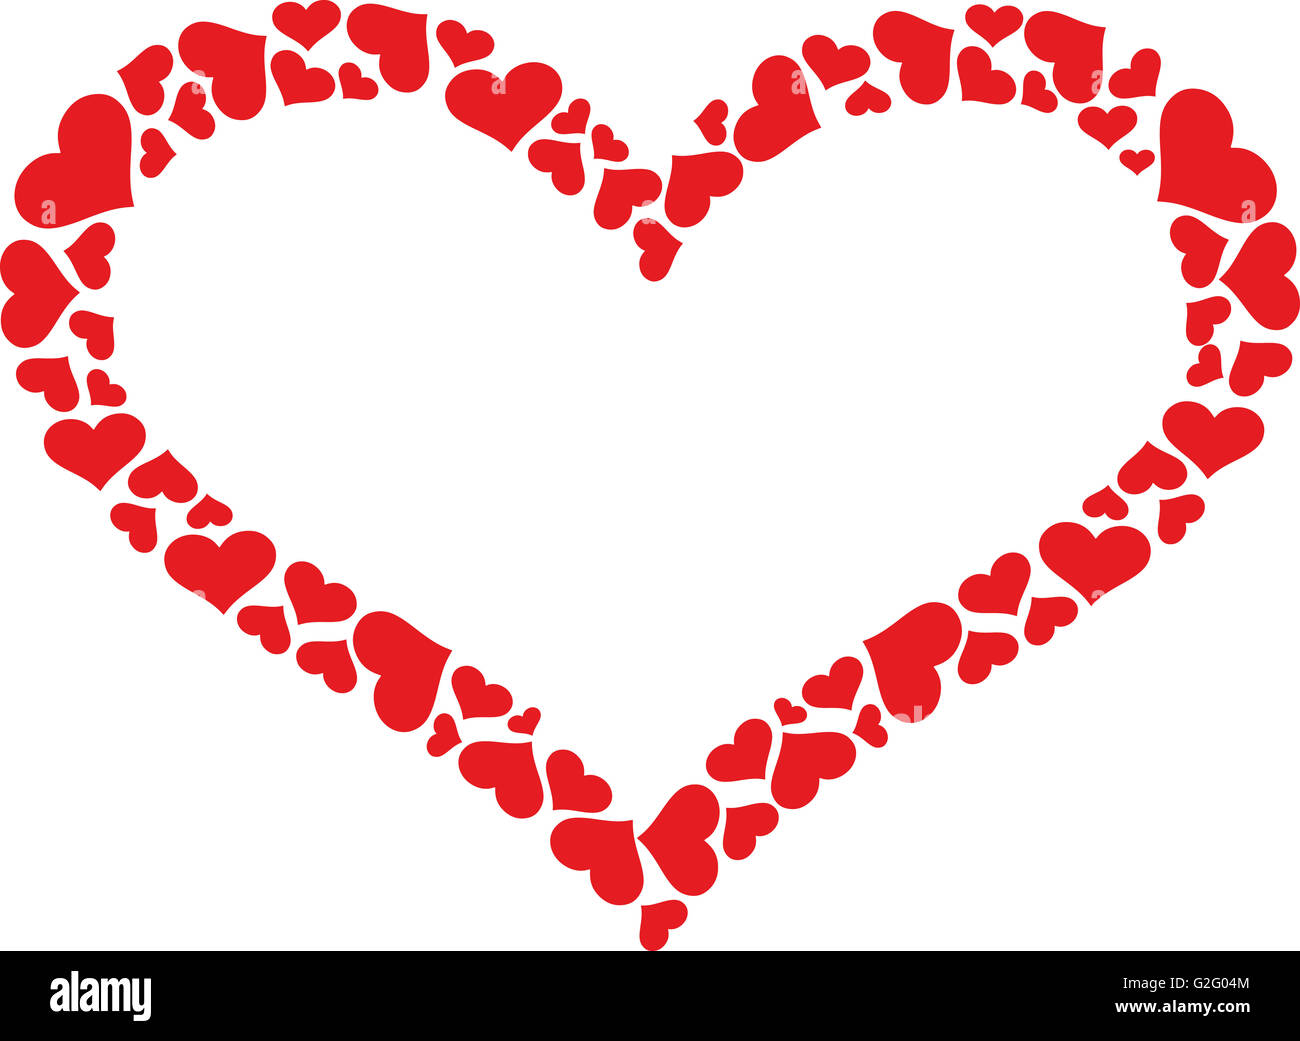 Heart outline with hearts Stock Photo